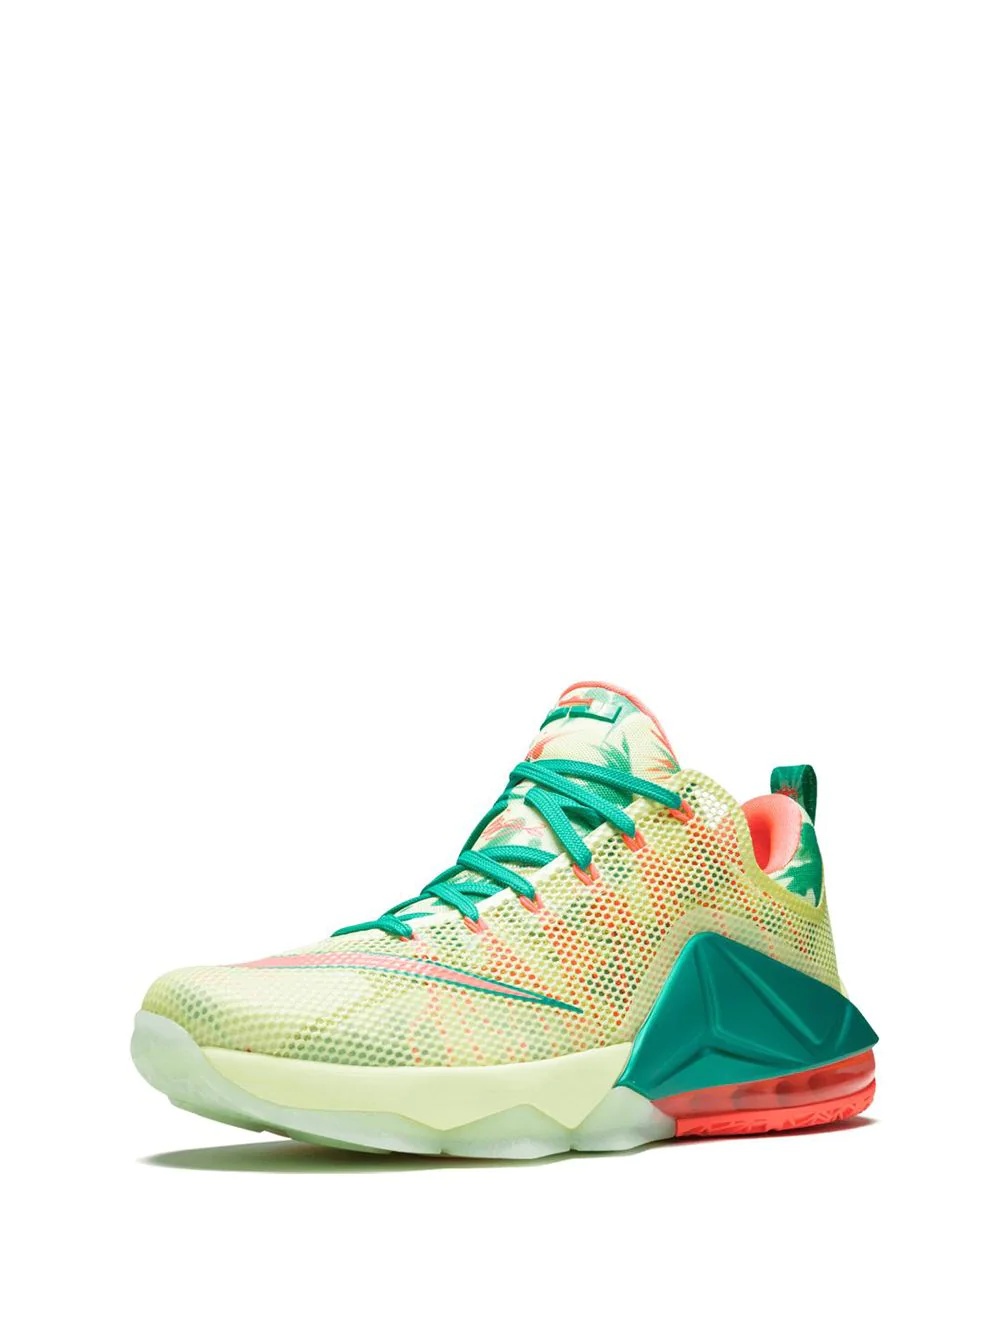 Lebron 12 Low sneakers - 4